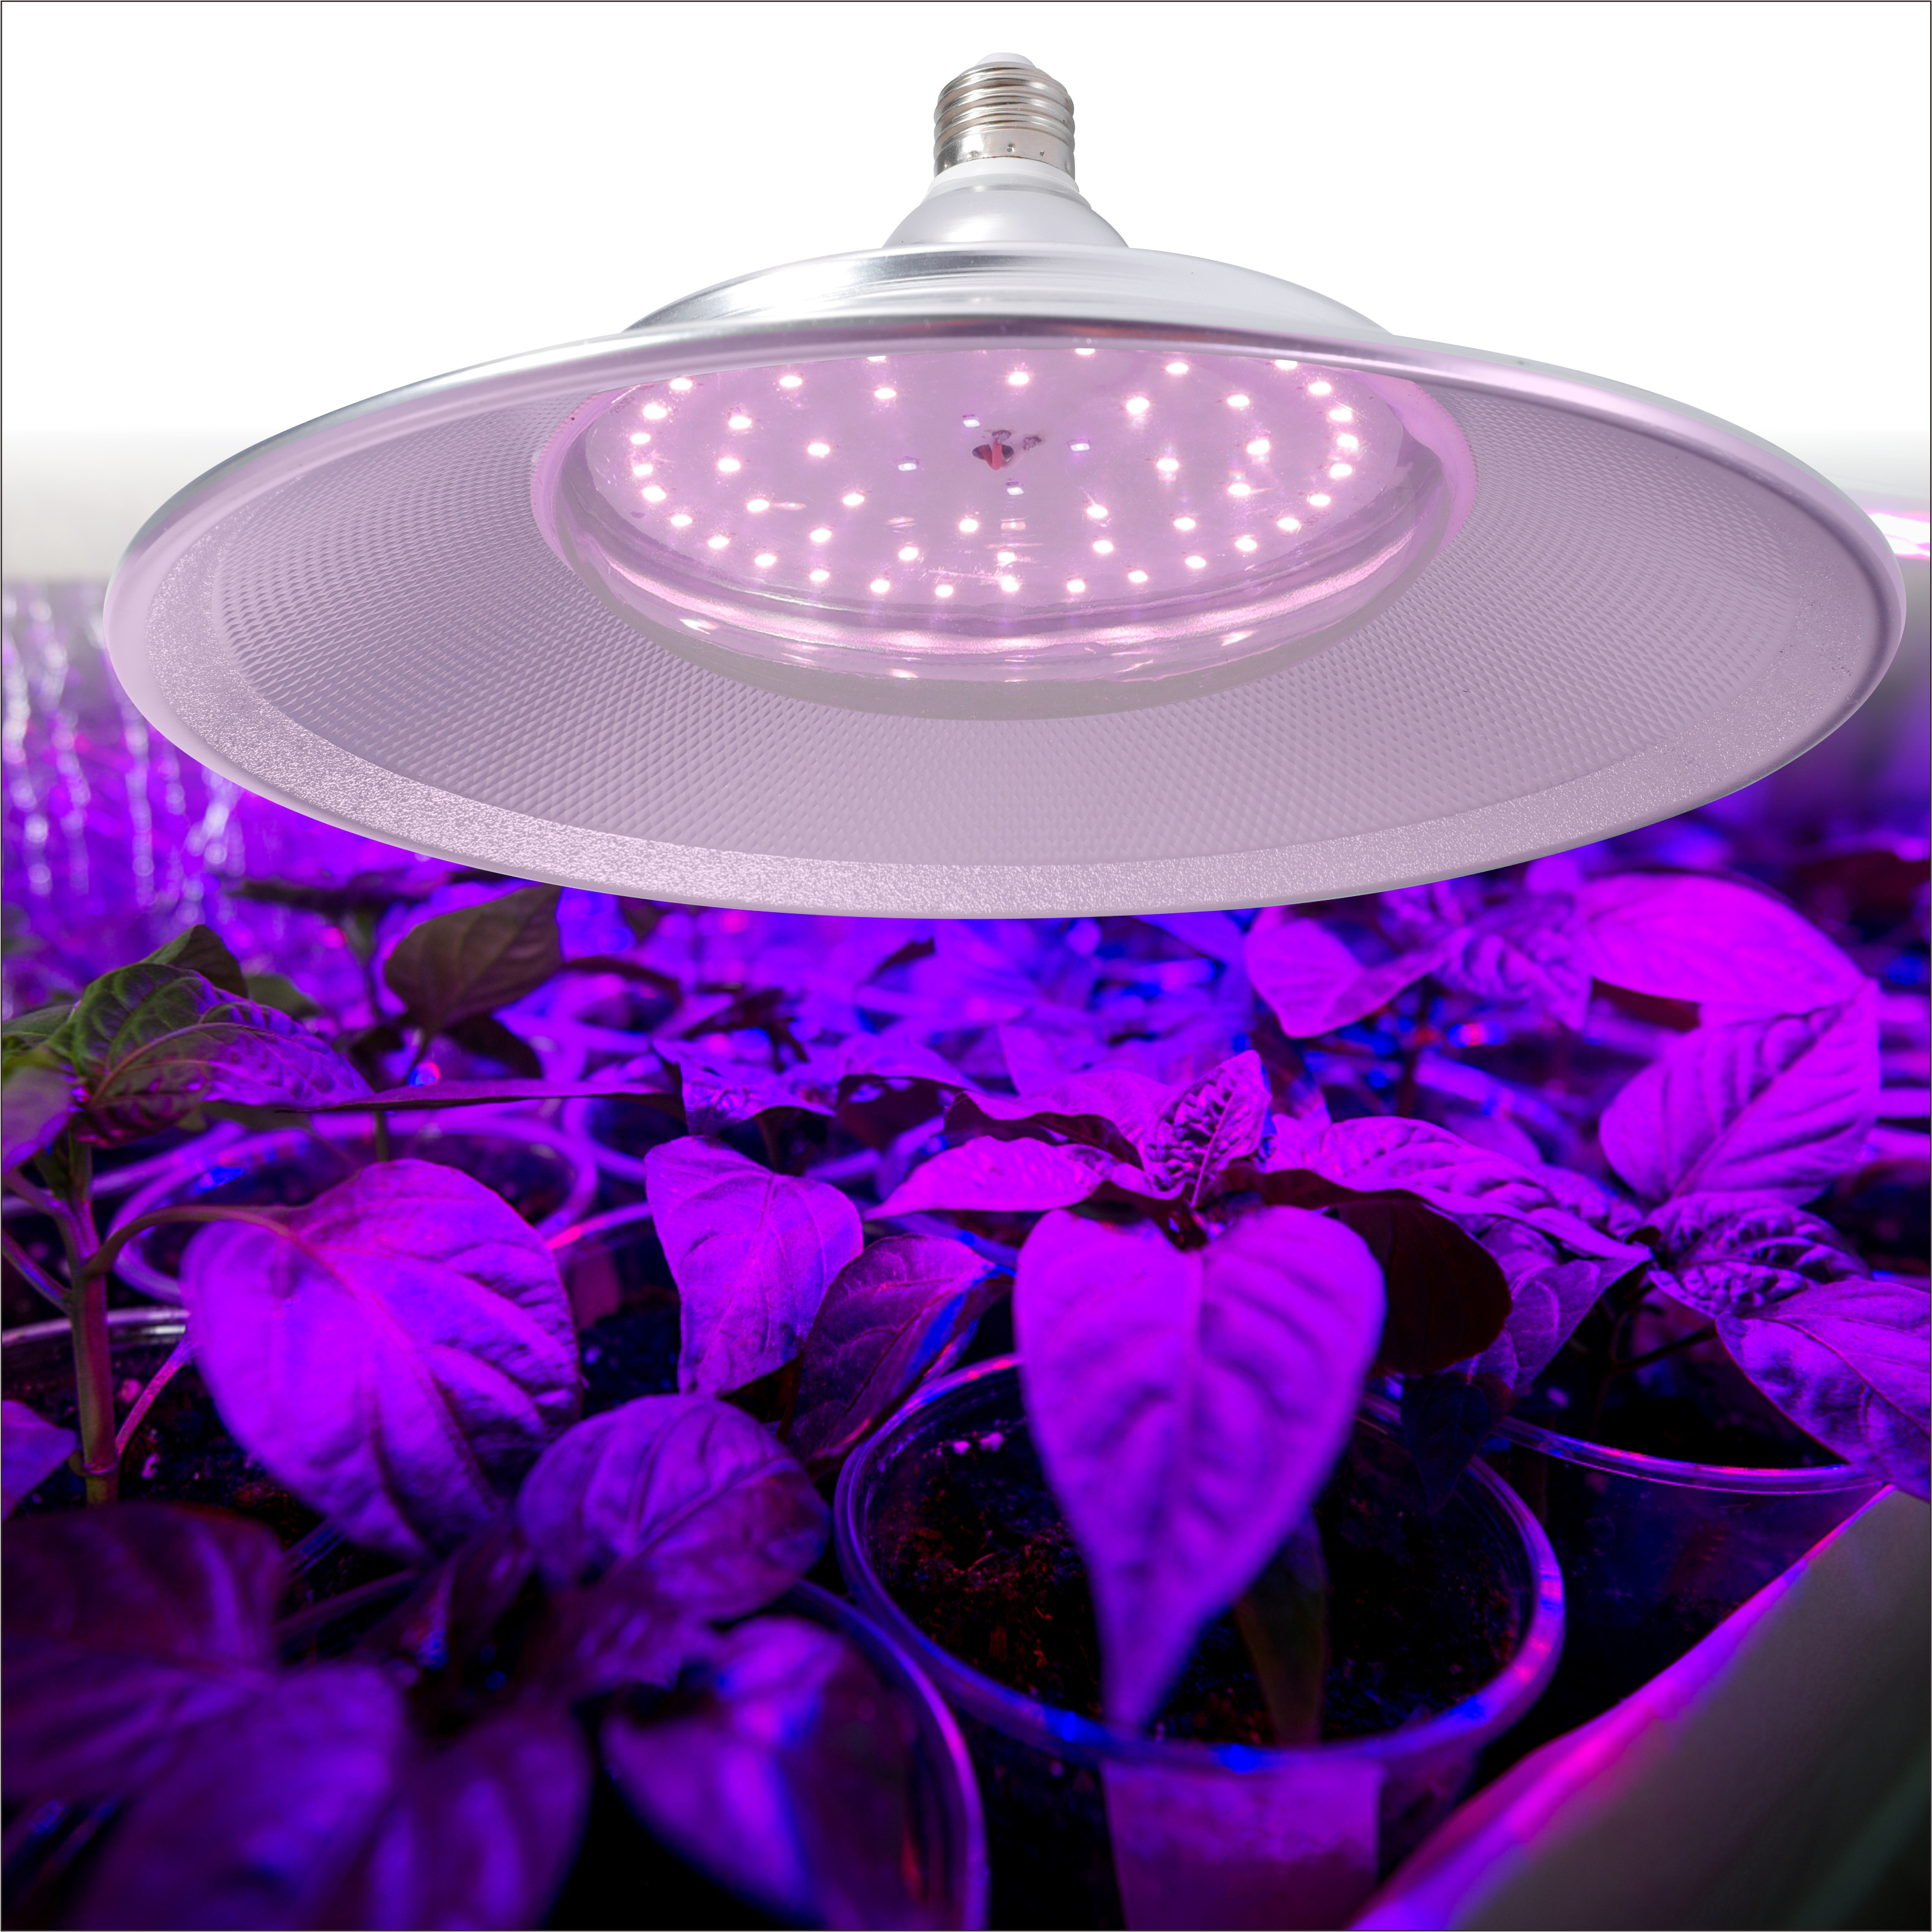 Led plant grow light 80W with New Diodes & IR Lights Full Spectrum Veg Bloom Growing Lamps for Indoor Plants Seeding Flower Led Plant Light Fixture